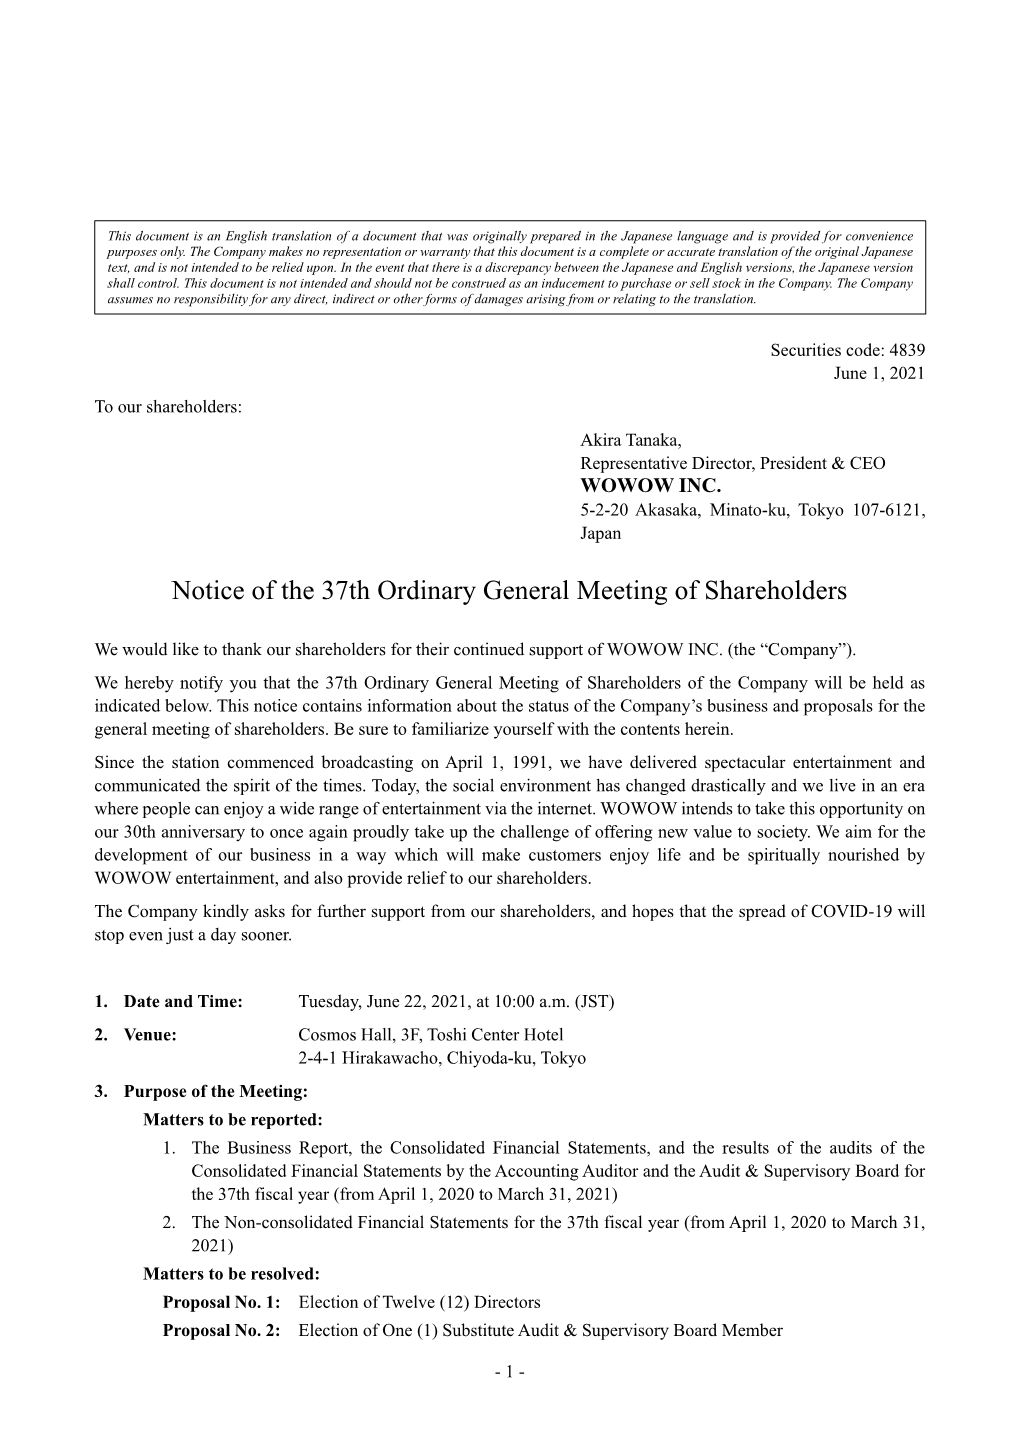 Notice of the 37Th Ordinary General Meeting of Shareholders